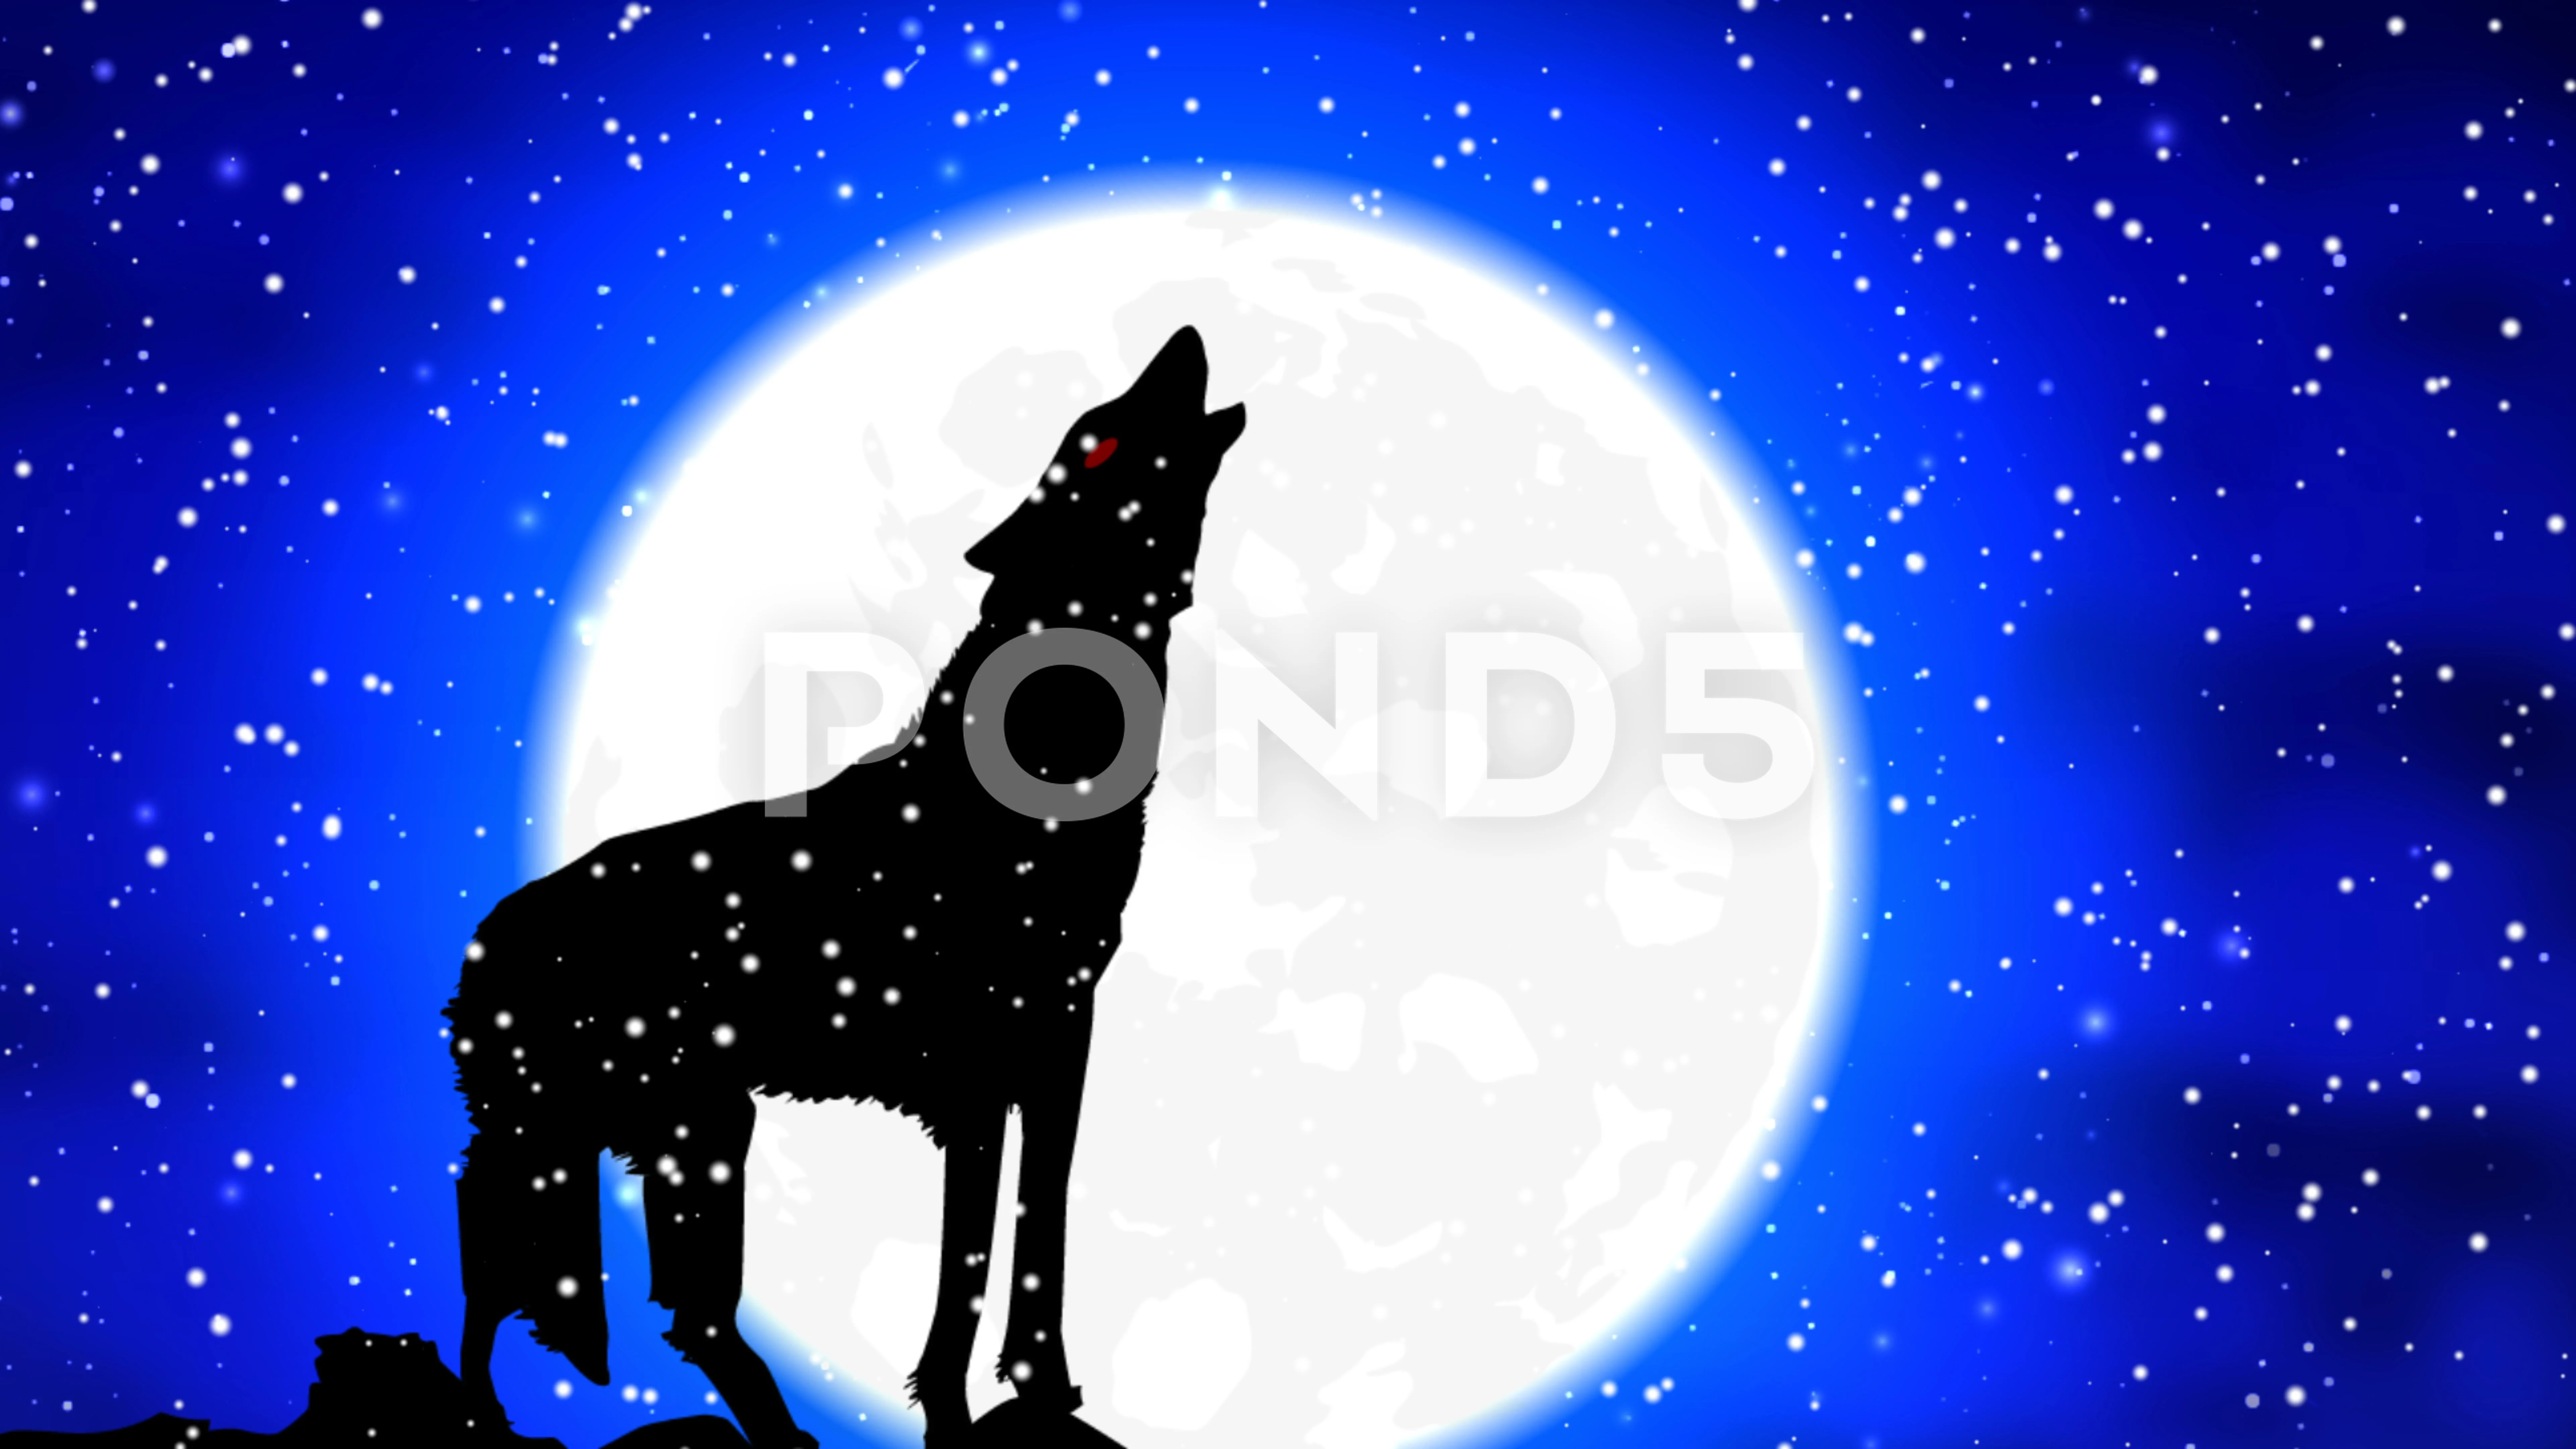 wolf howling at full moon drawing